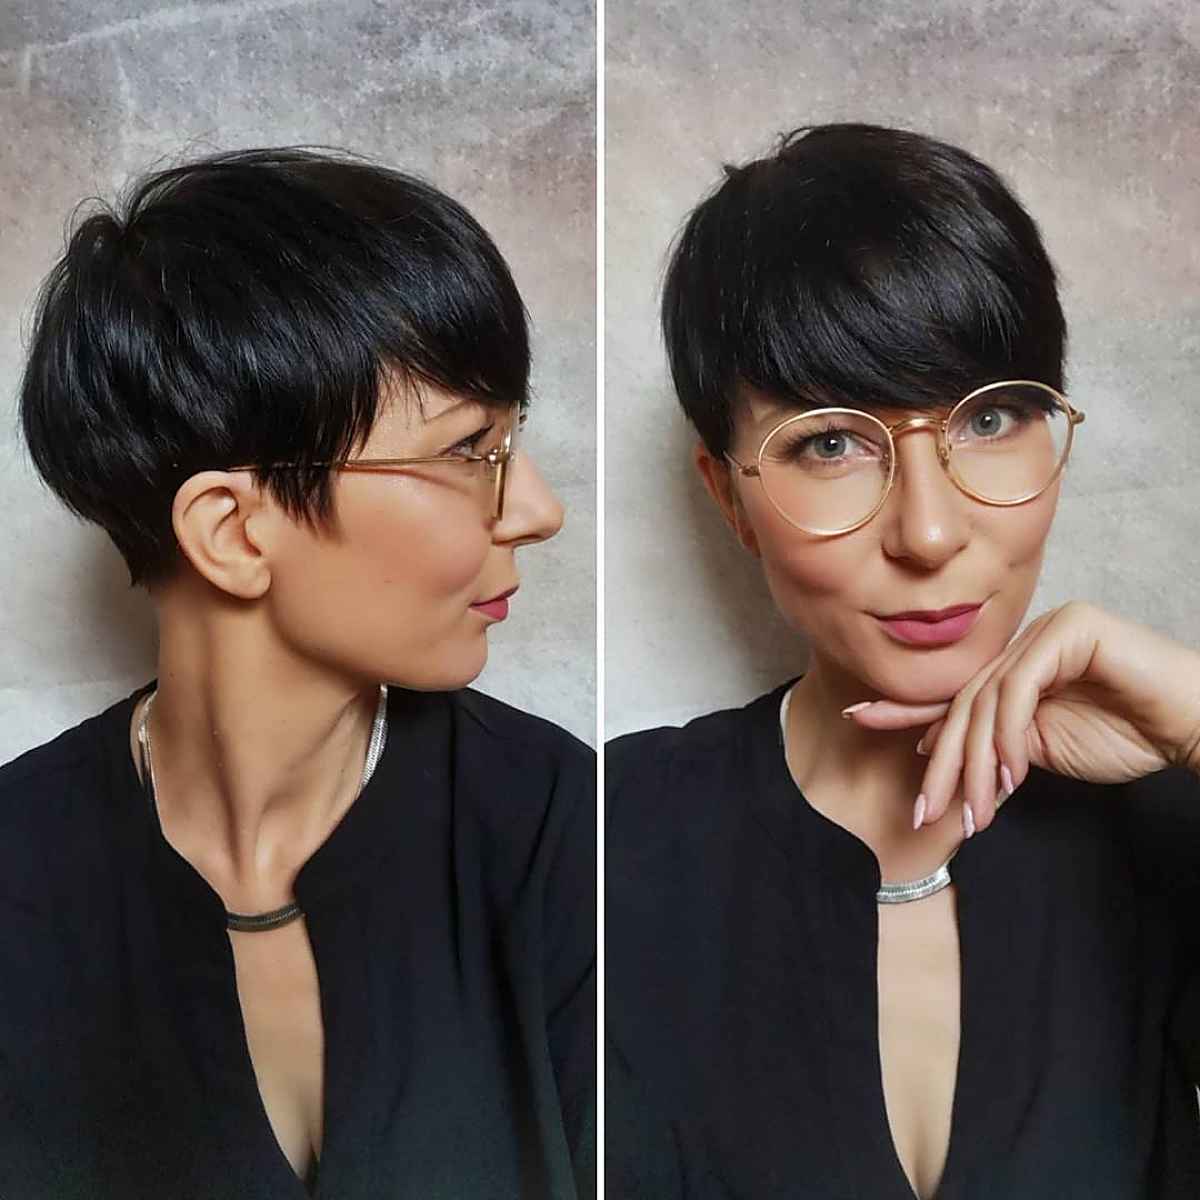 Layered Short Pixie Cut for Women with Glasses